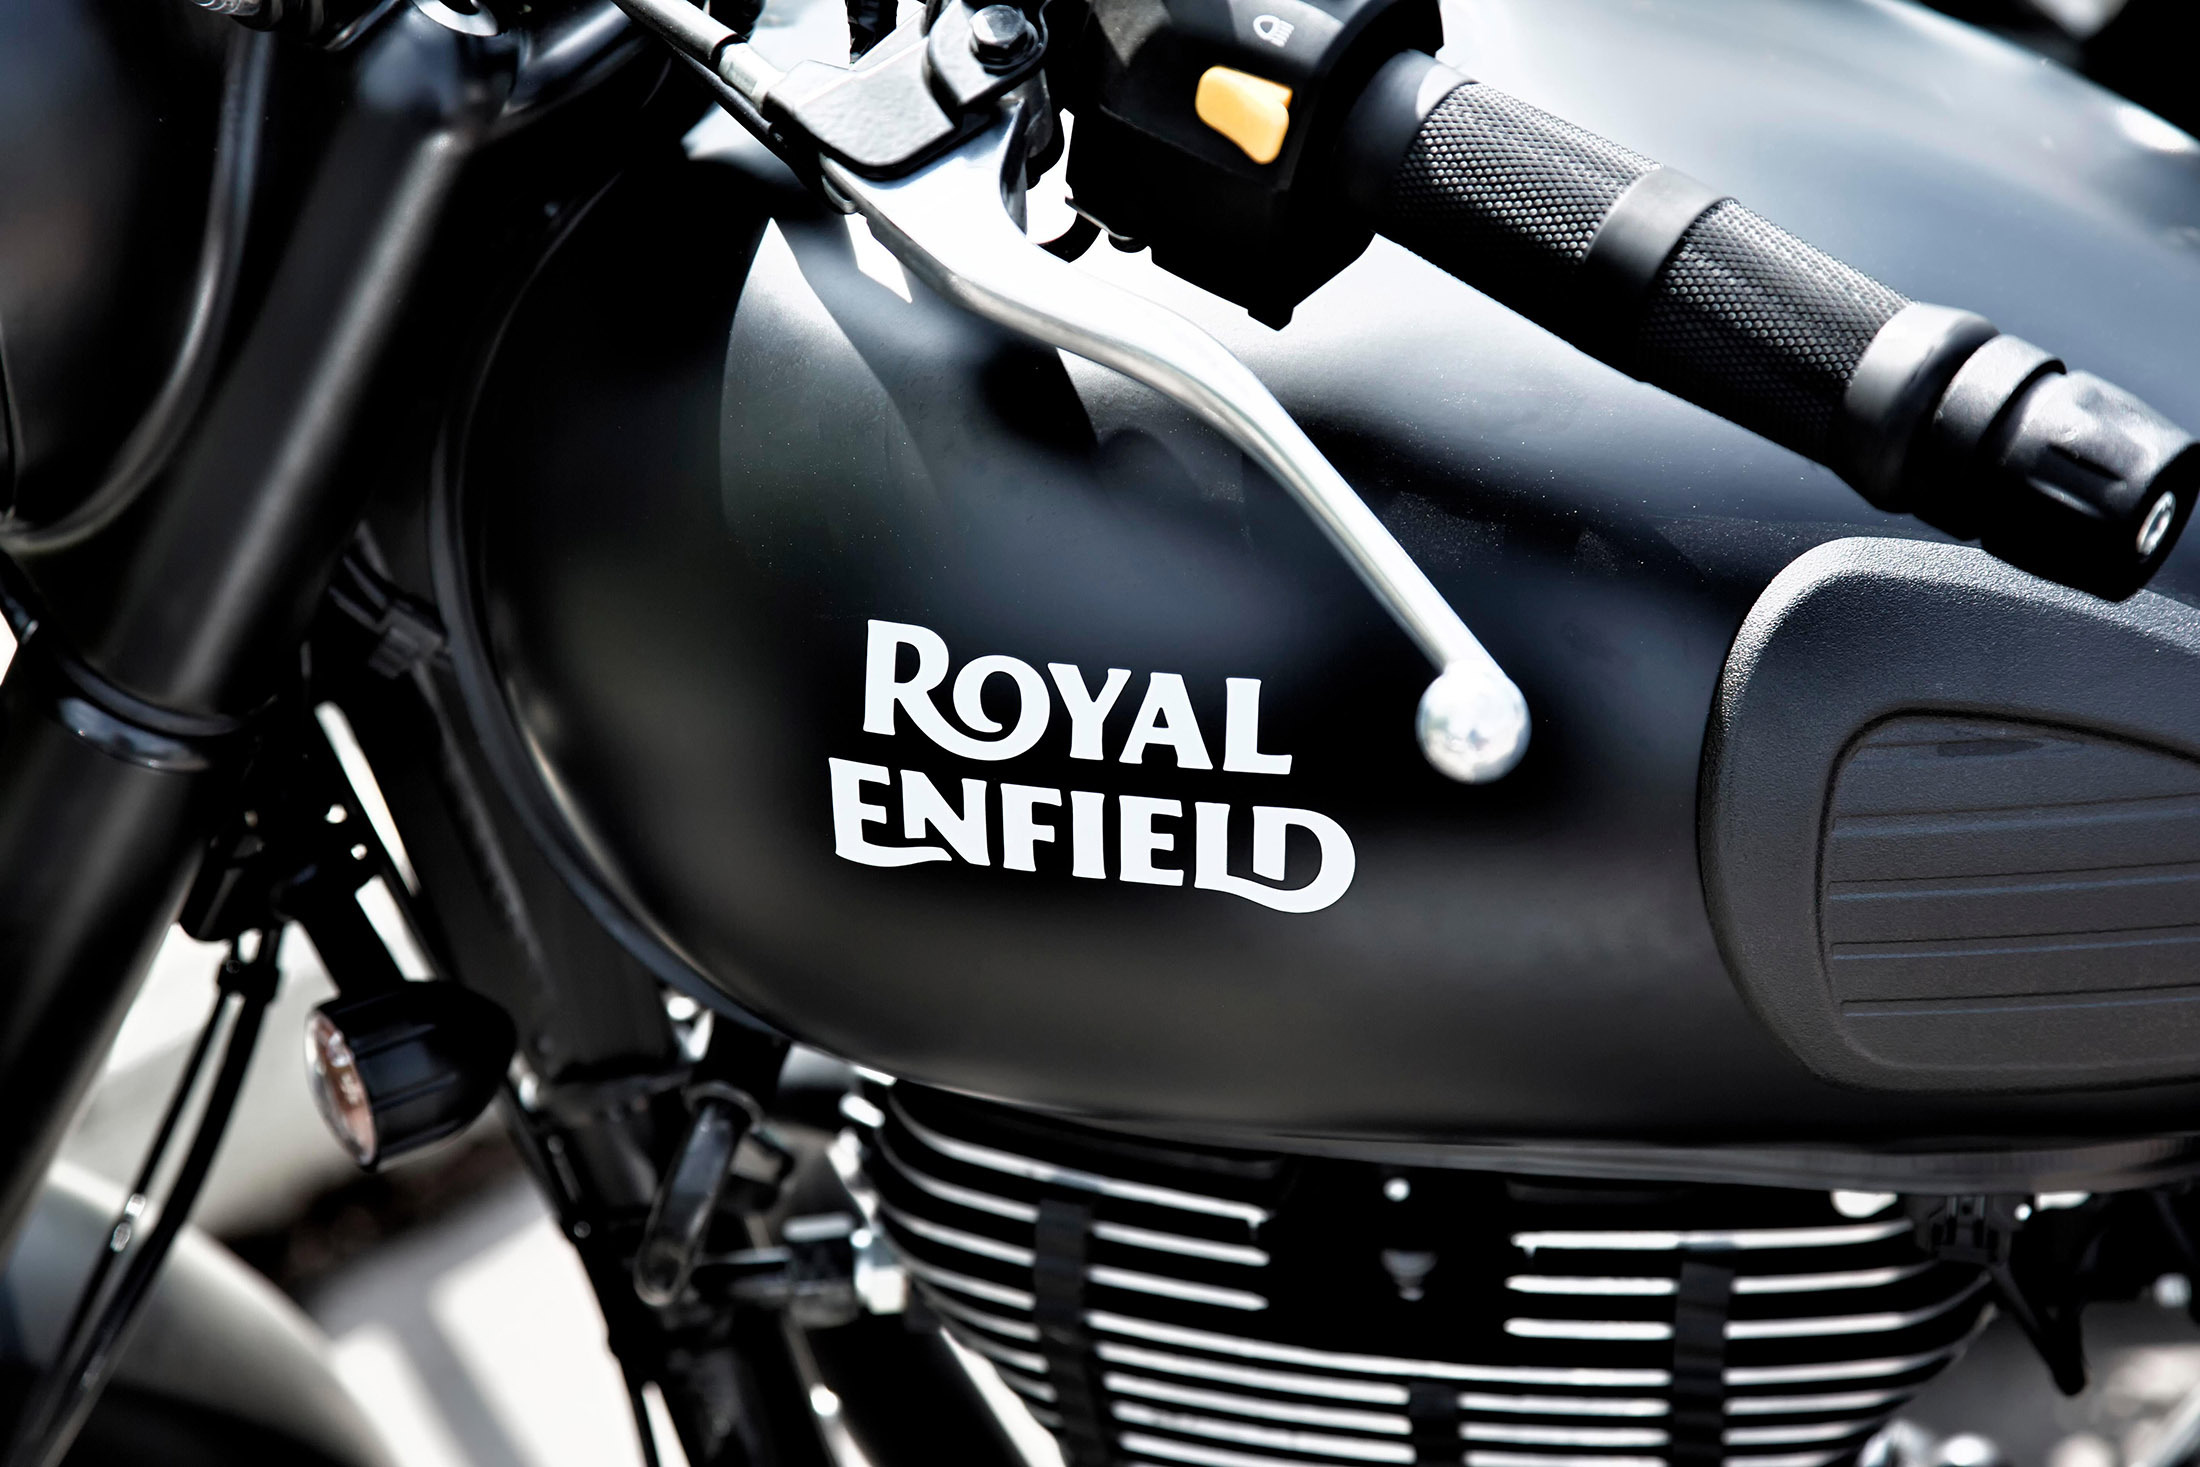 W7J64P Petrol tank with the inscription Royal Enfield, Berlin, Germany. Image shot 2019. Exact date unknown.